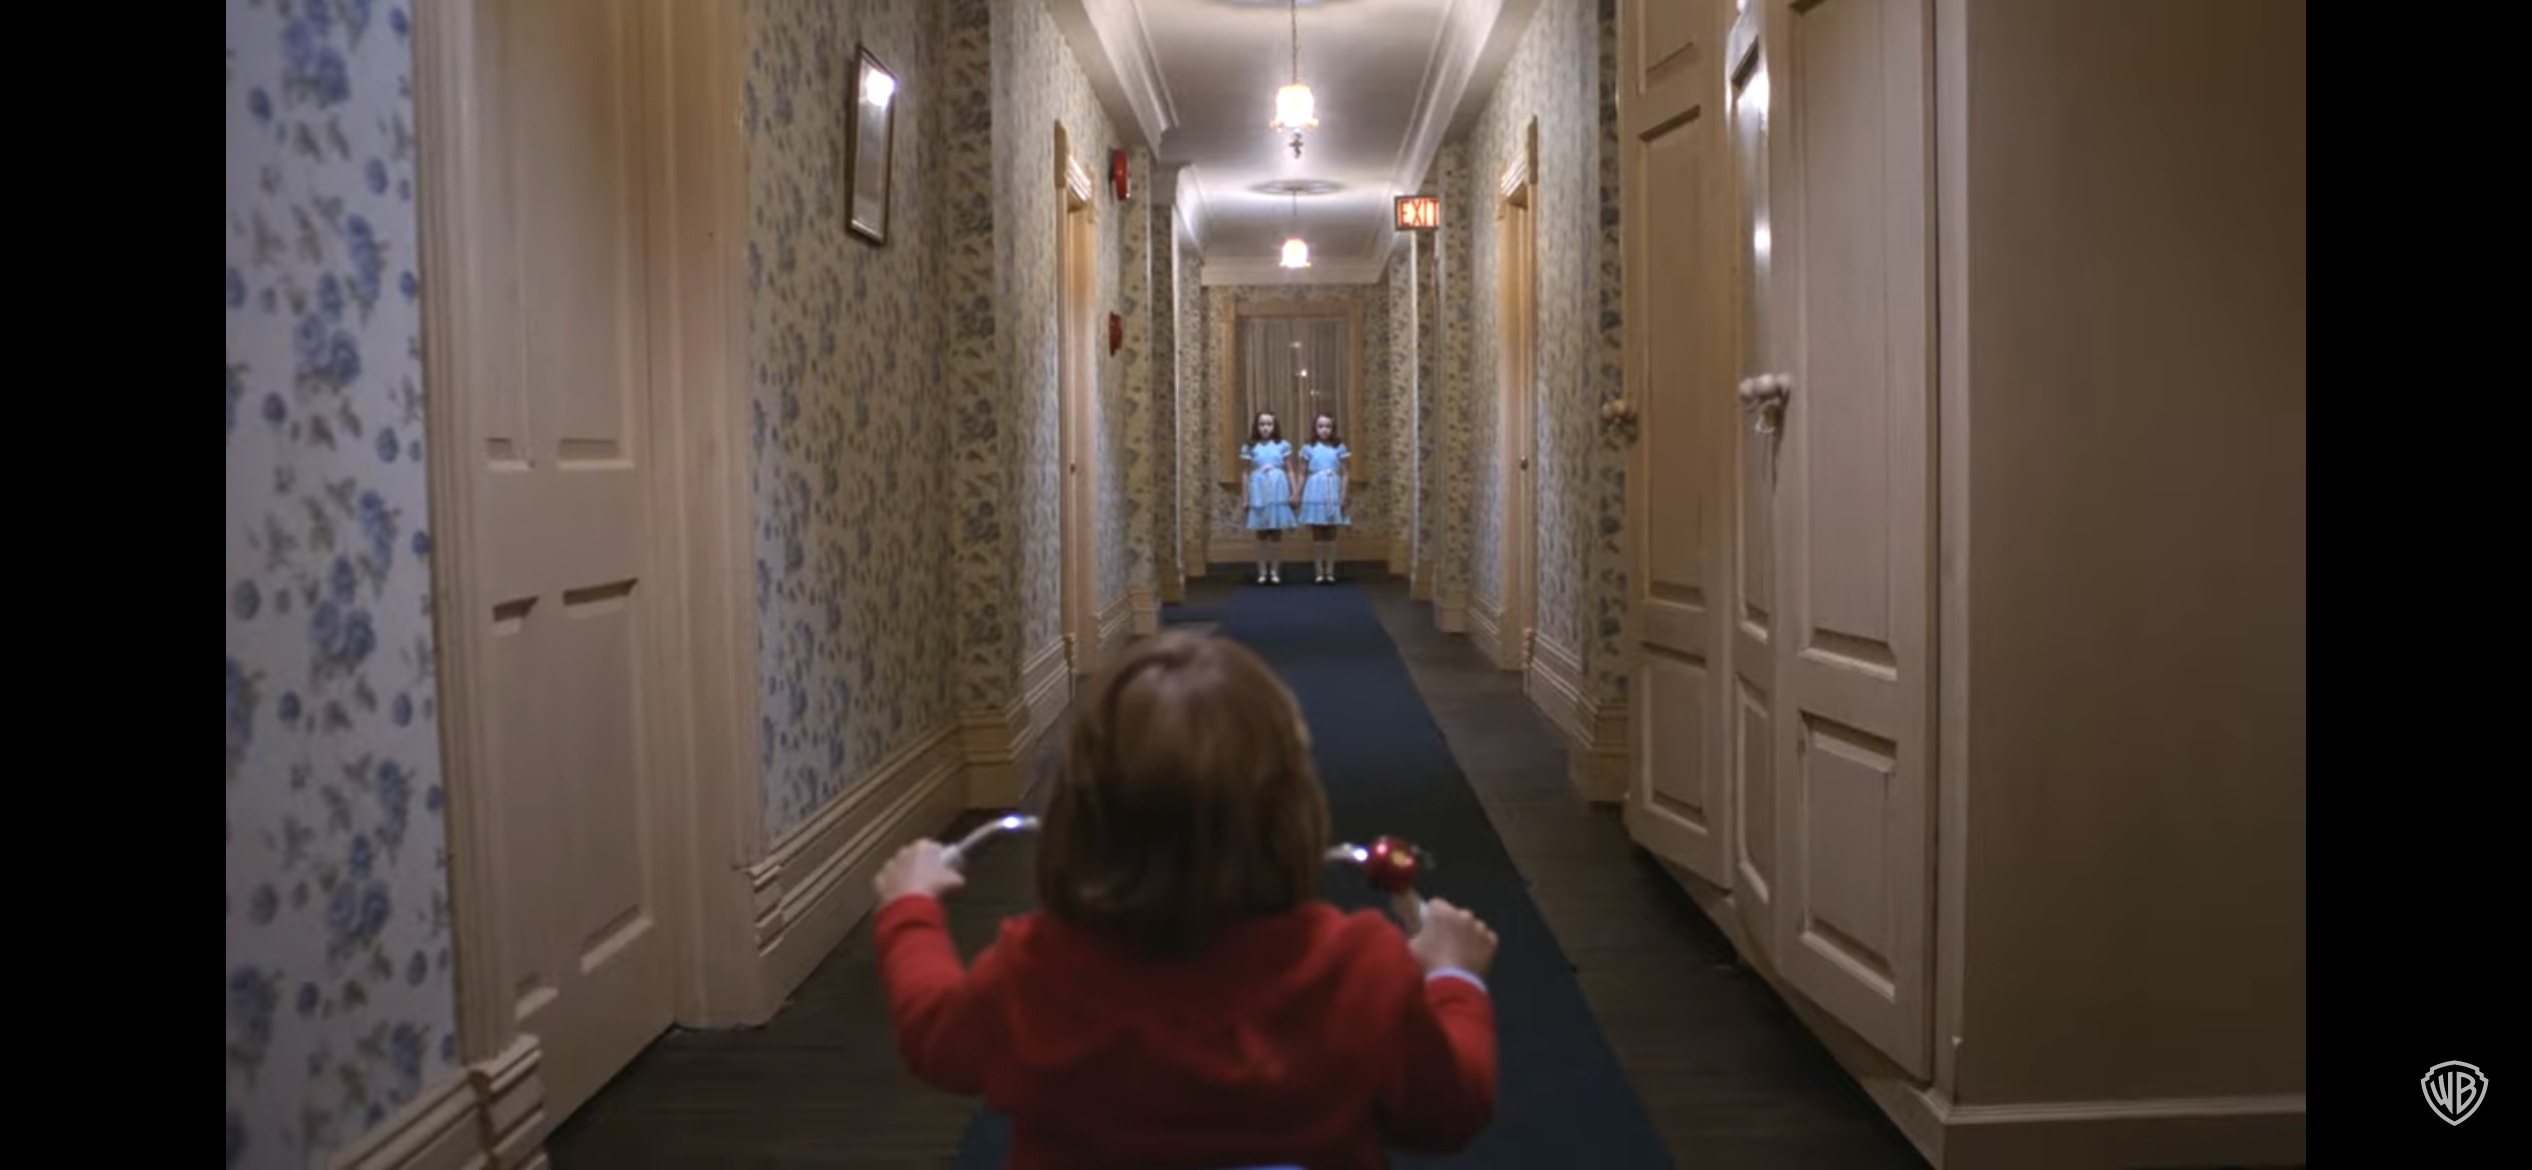 Kid riding tricycle in eerie hallway with two twin girls at end of the hall